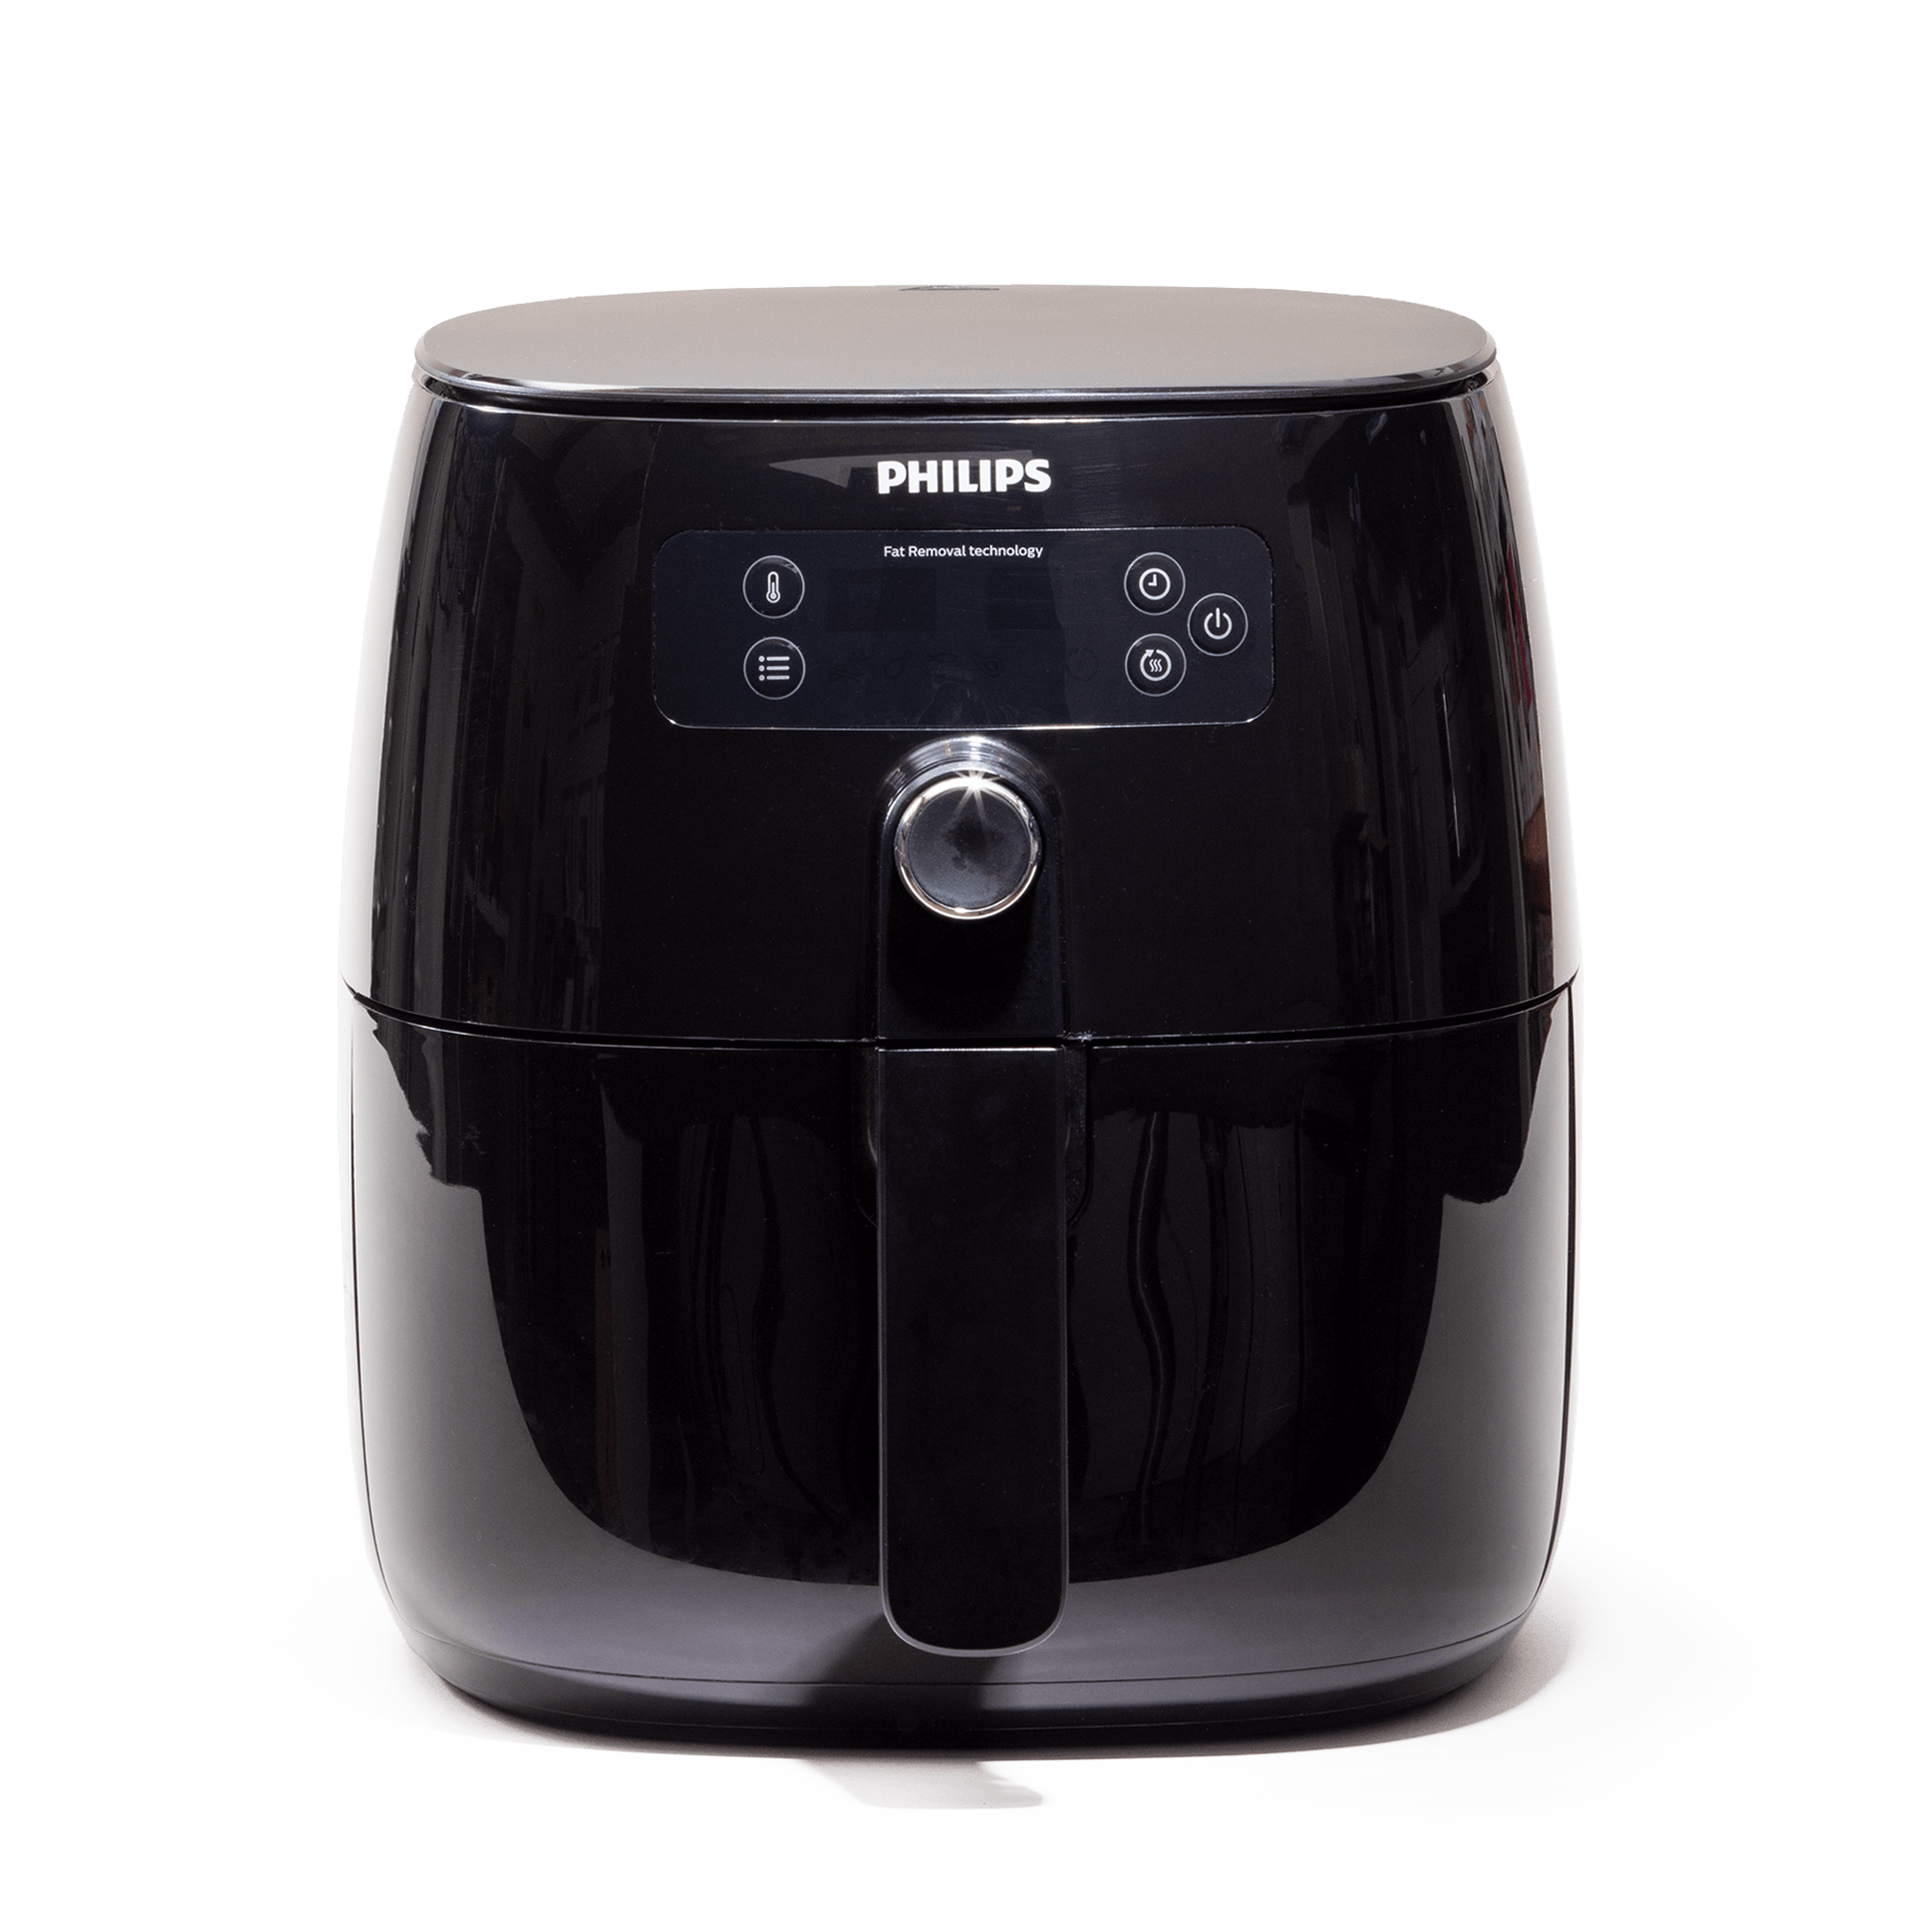 https://res.cloudinary.com/hksqkdlah/image/upload/SIL_Phillips_Premium-Airfryer-with-Fat-Removal-Technology_38734-2_uft8y7.png